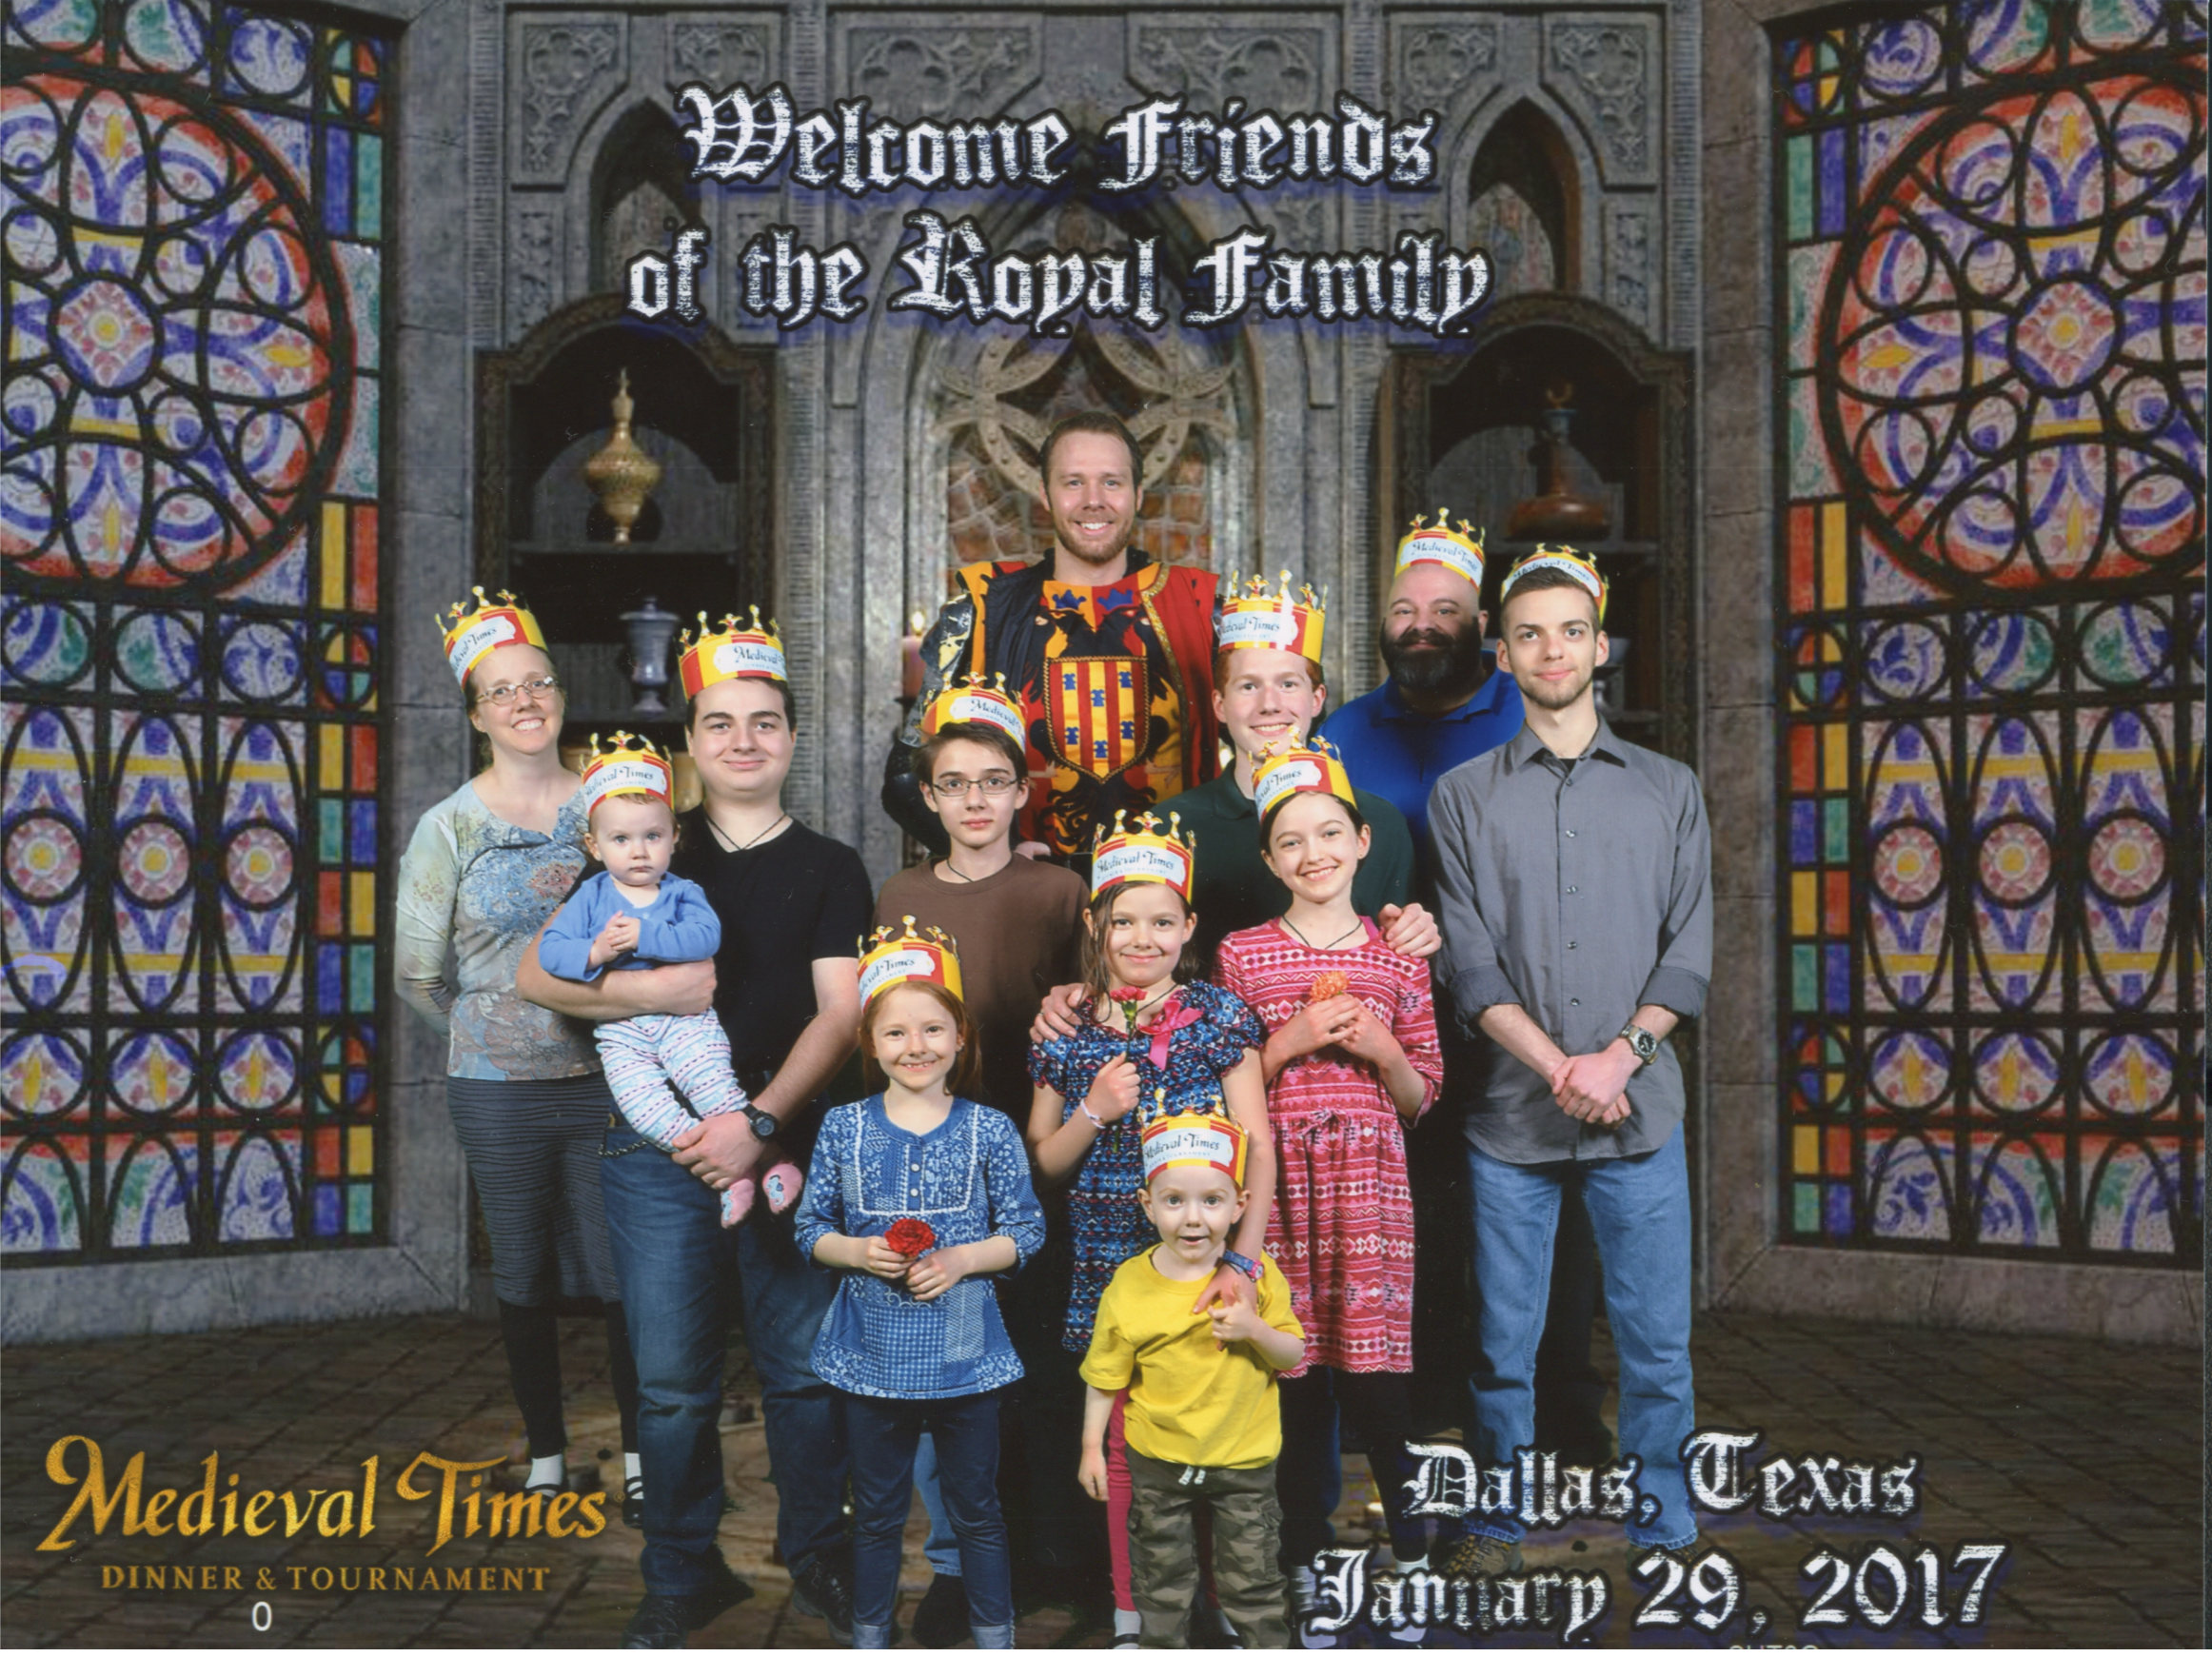 Medieval Times Stained Glass Windows Background. Jen, Nunzio hoilding Caterina, Catie, Cross, Eric the Red and Yellow Knight, Bernie, Becket, Michael, Jacinta, Justin and Joseph. Bottom Text: 'Dallas, Texas January 29, 2017'